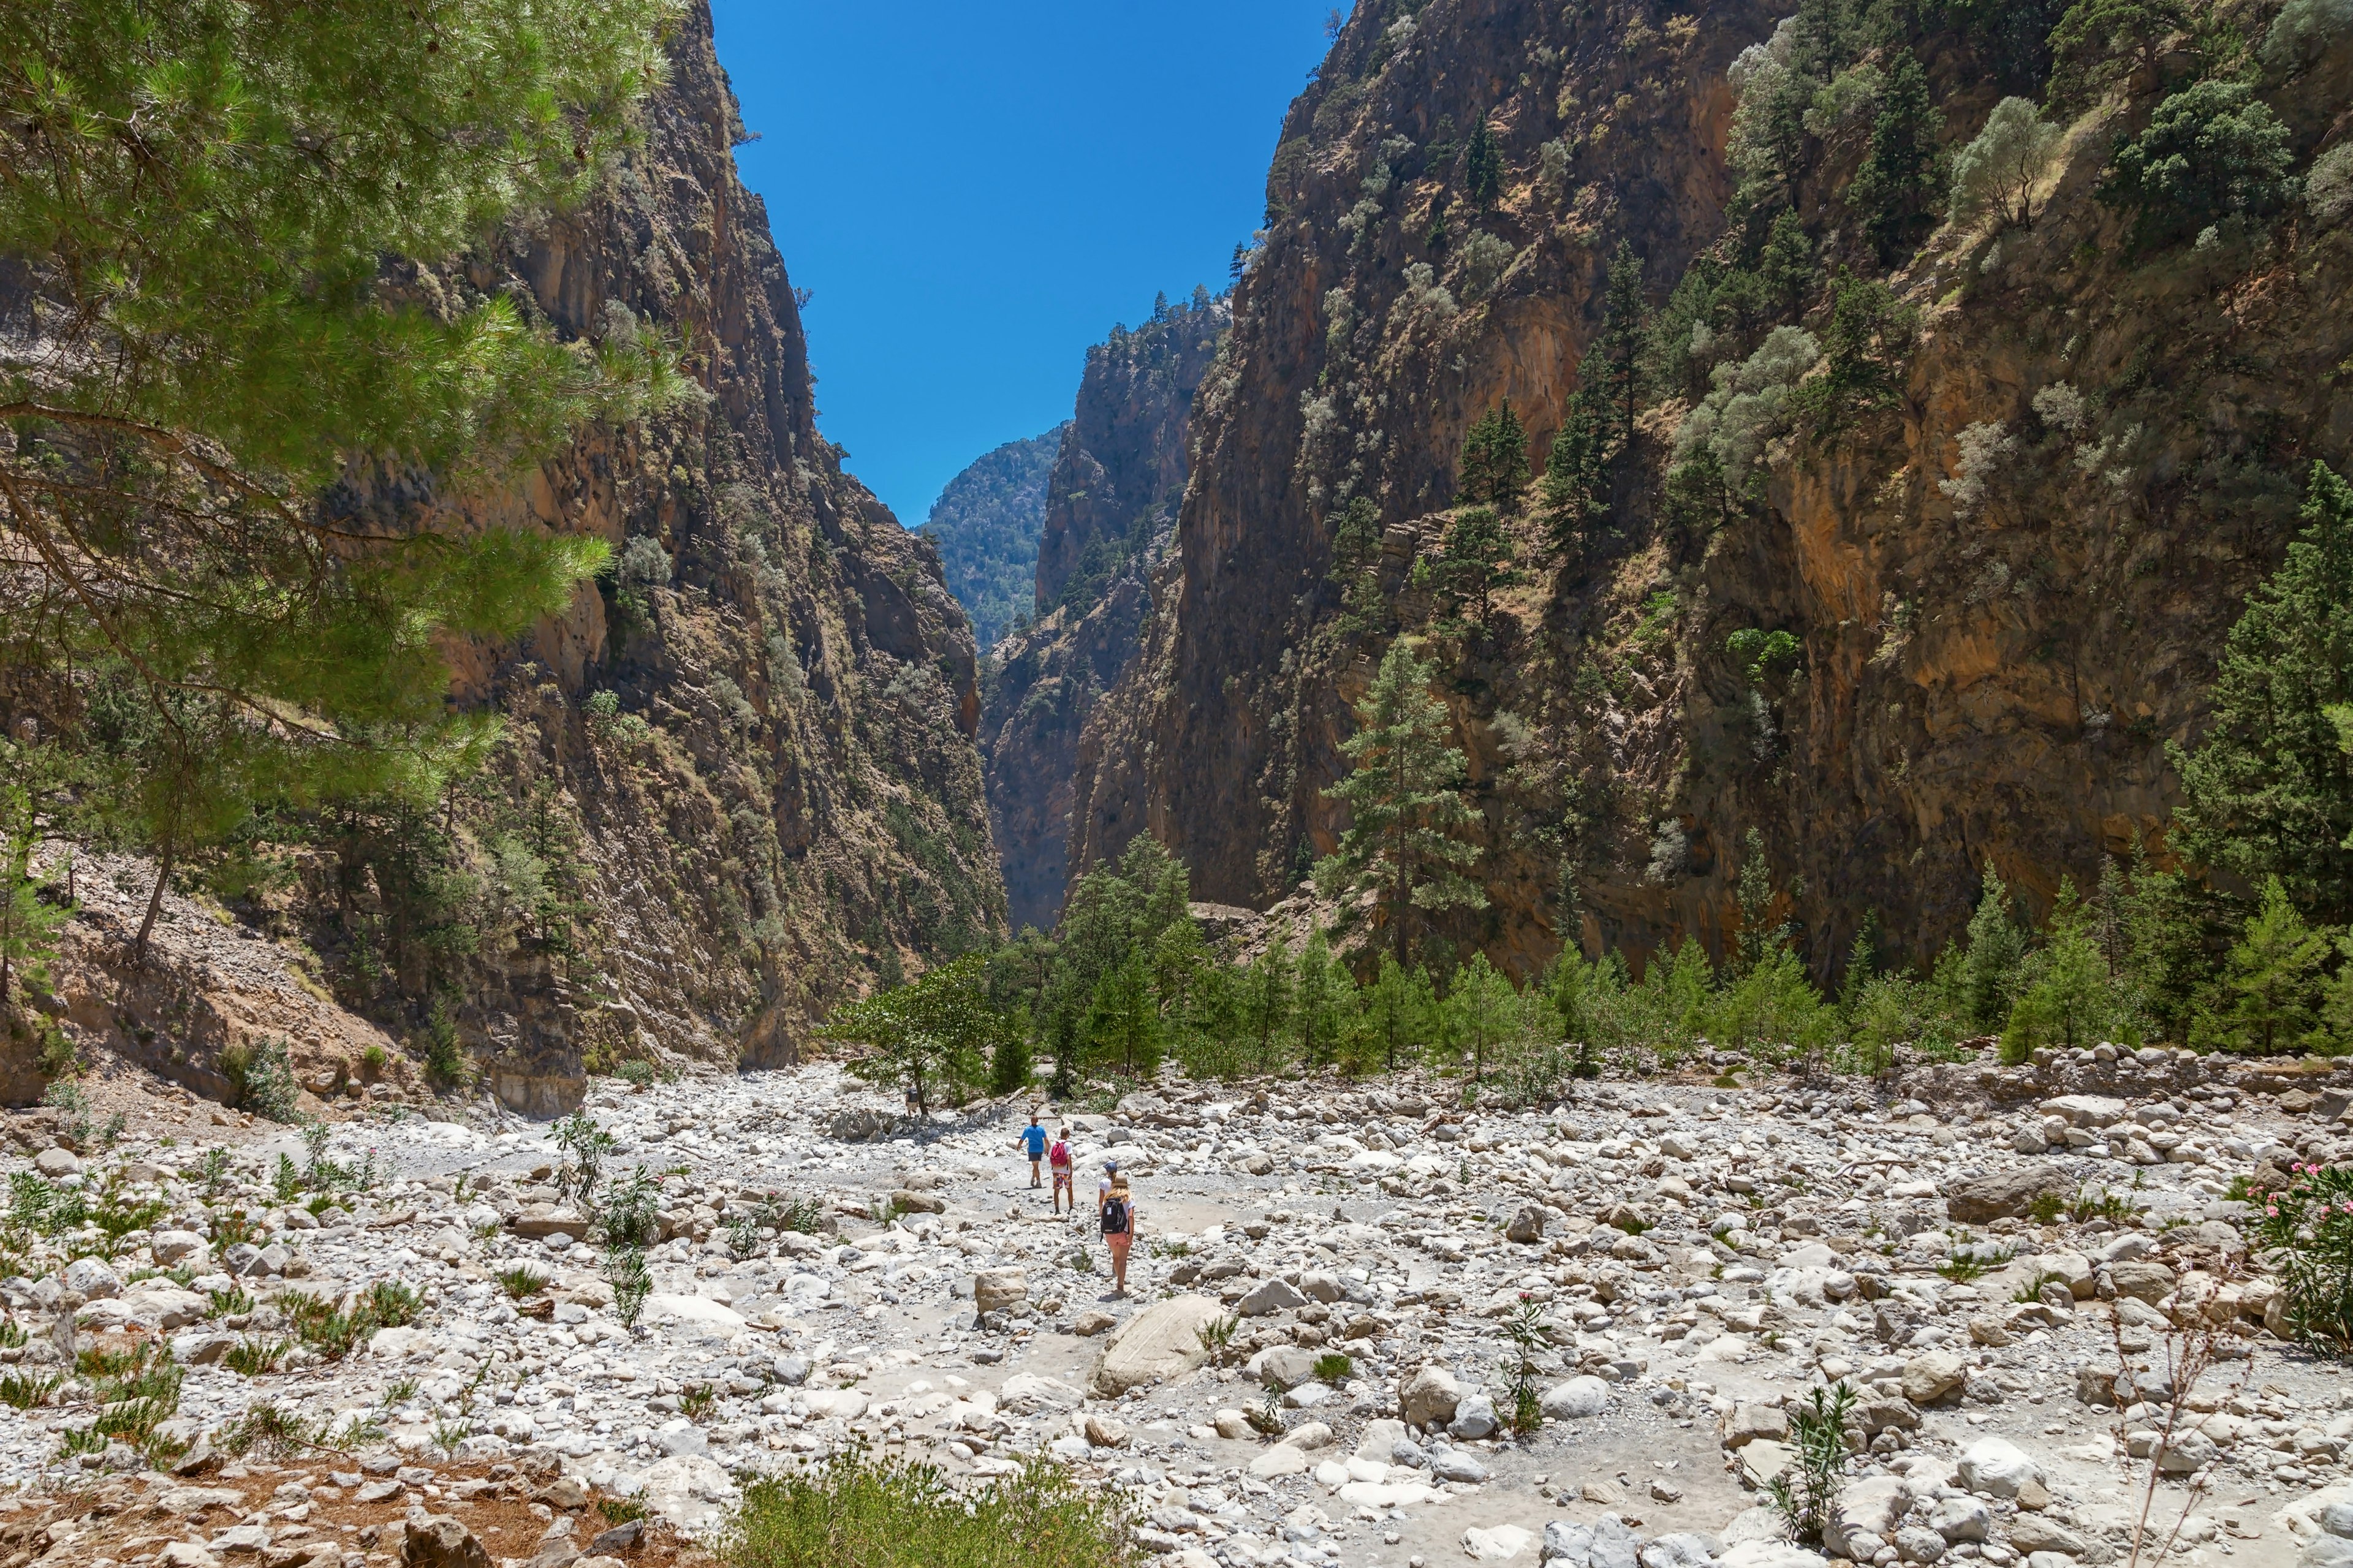 Hikers walking through a dry riverbed at Samaria Gorge in the White Mountains.